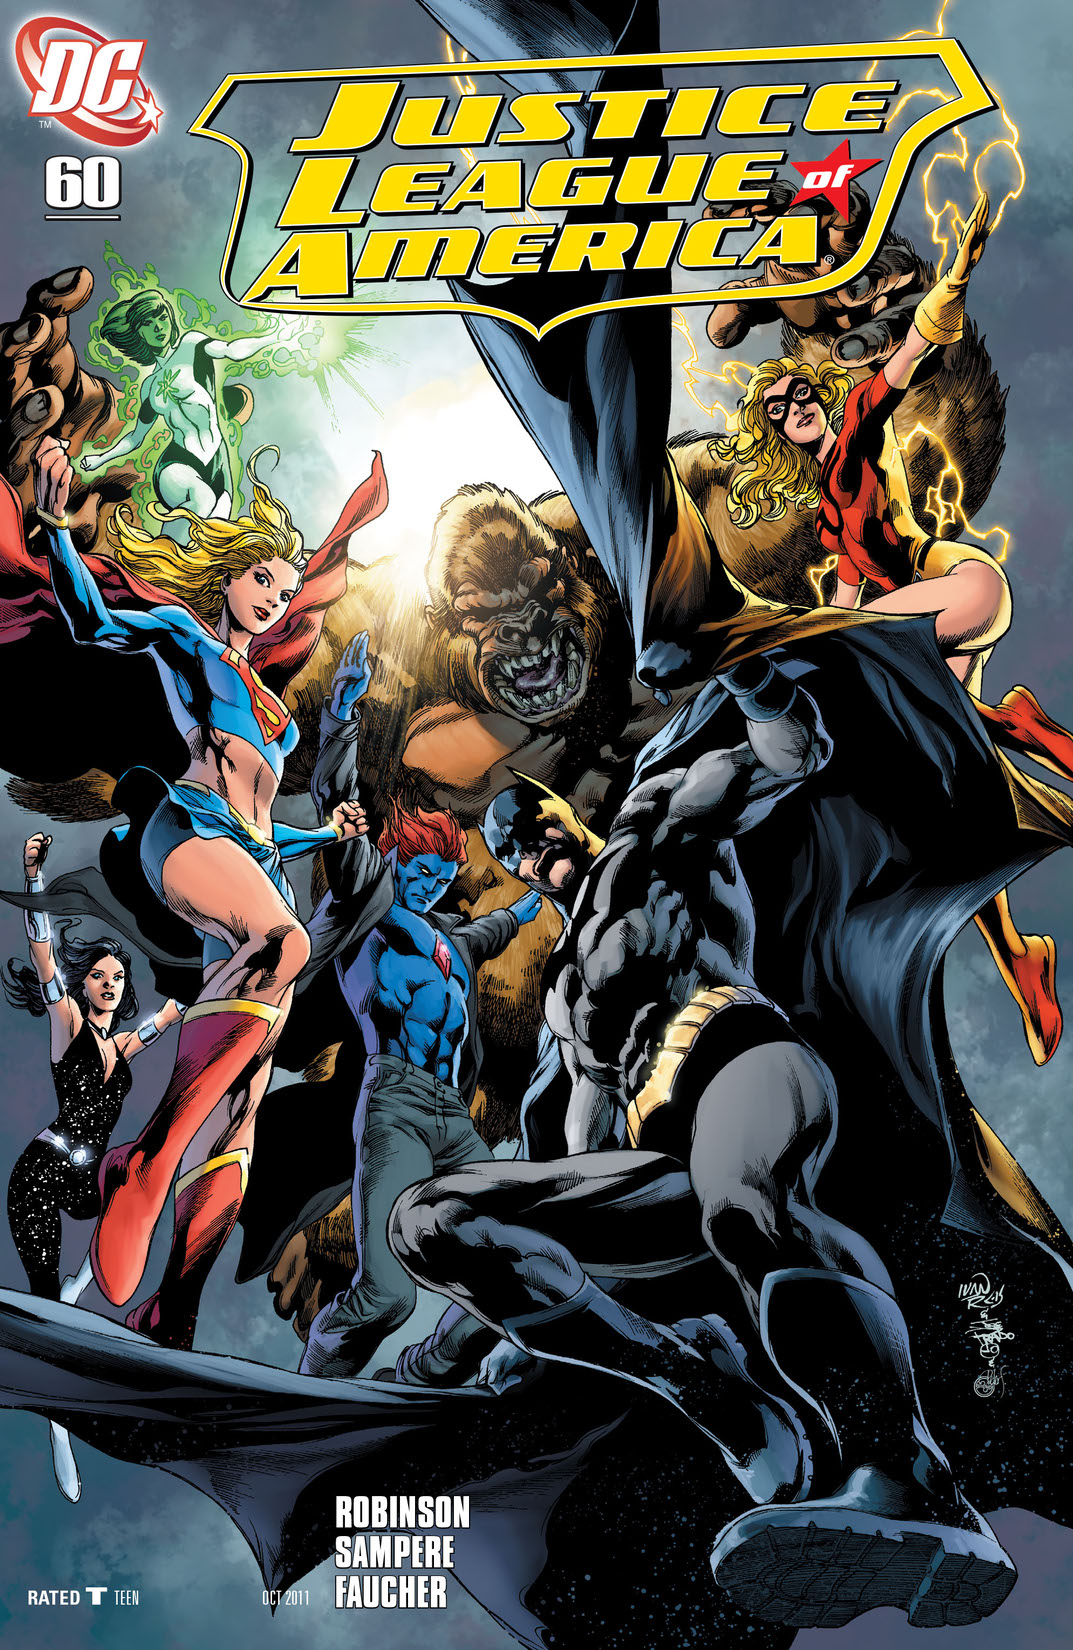 Justice League of America (2006-) #60 preview images